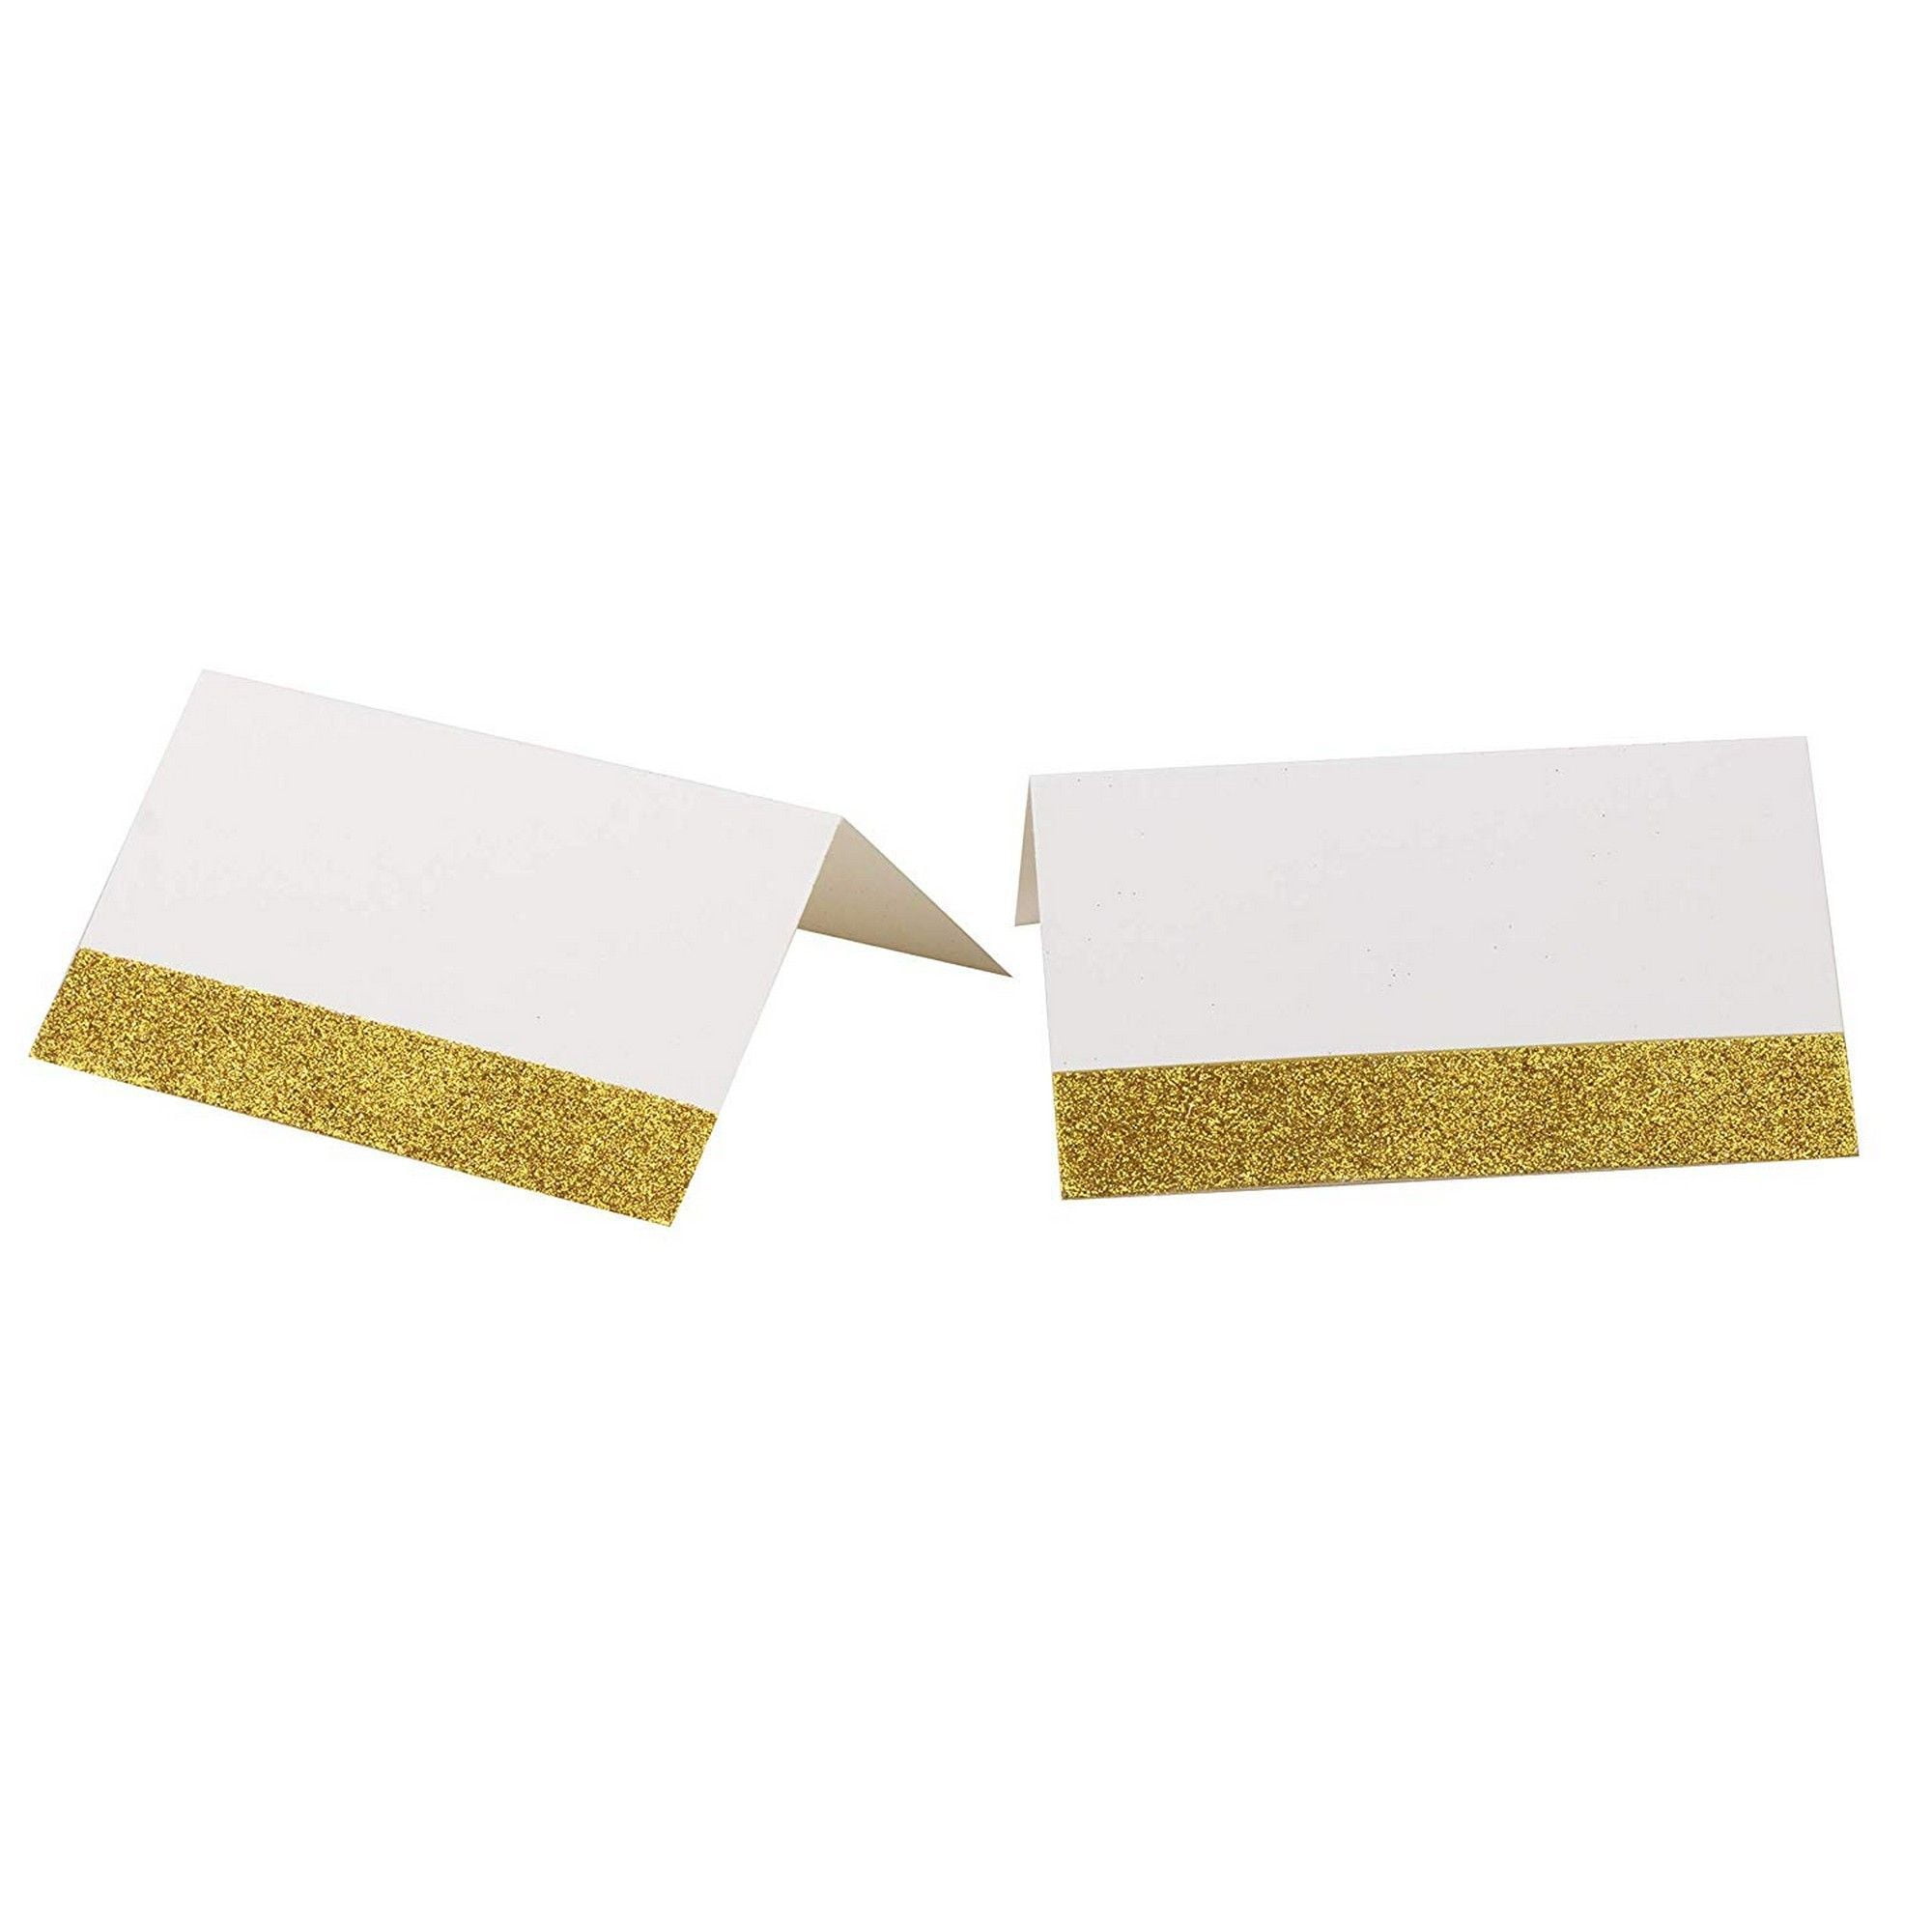 Gold Glitter Place Cards Glitter Place Cards Place Cards Wedding Place Cards